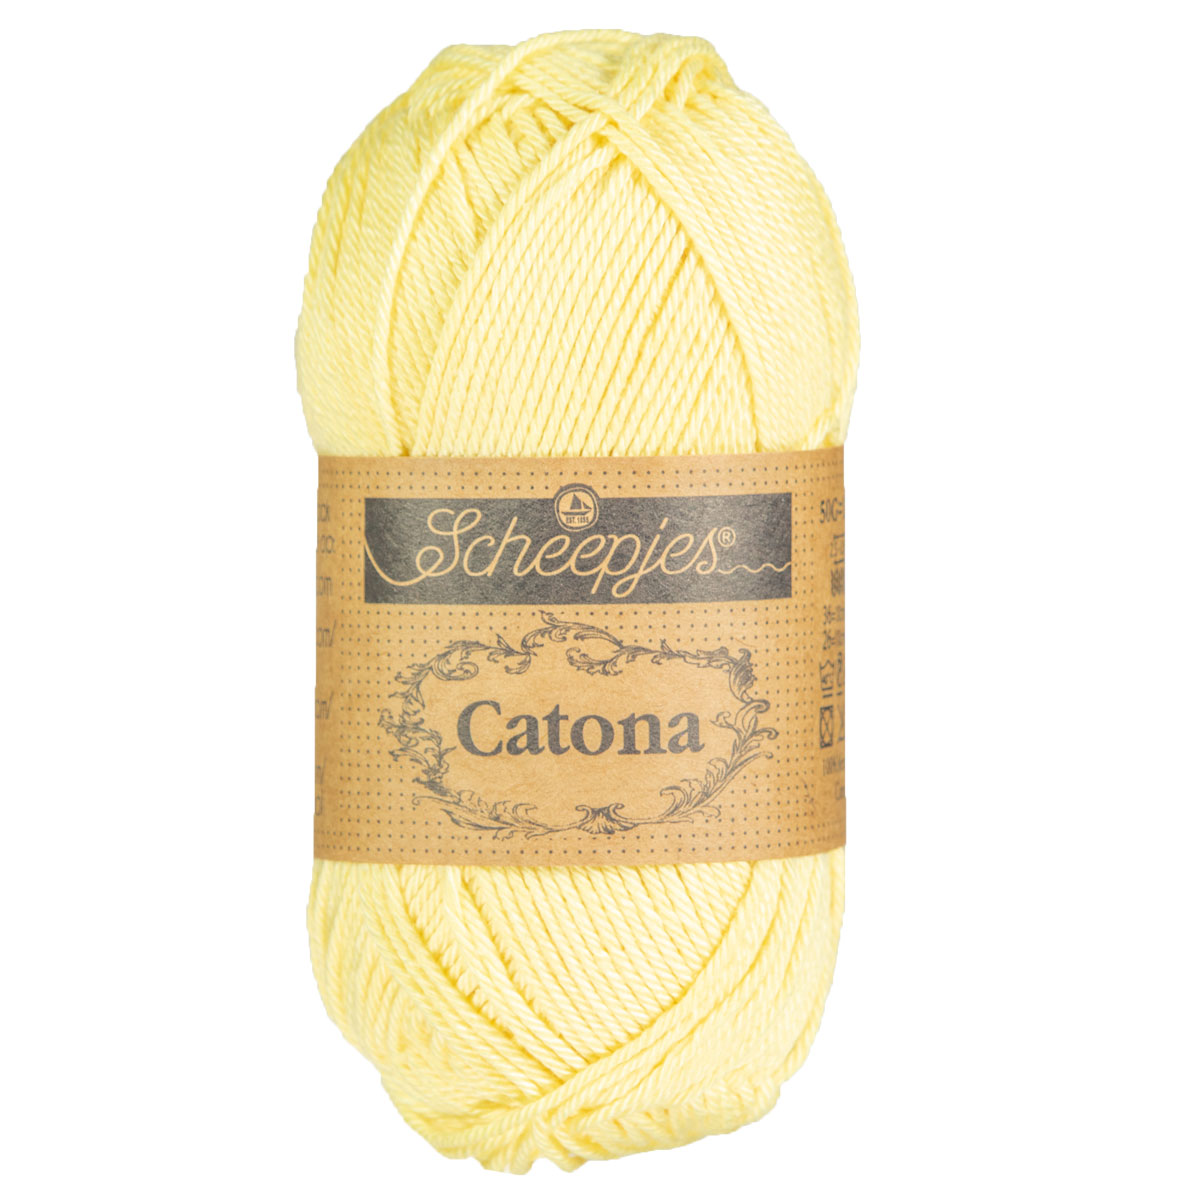 Scheepjes Catona ~ A Yarn Review - Crystalized Designs